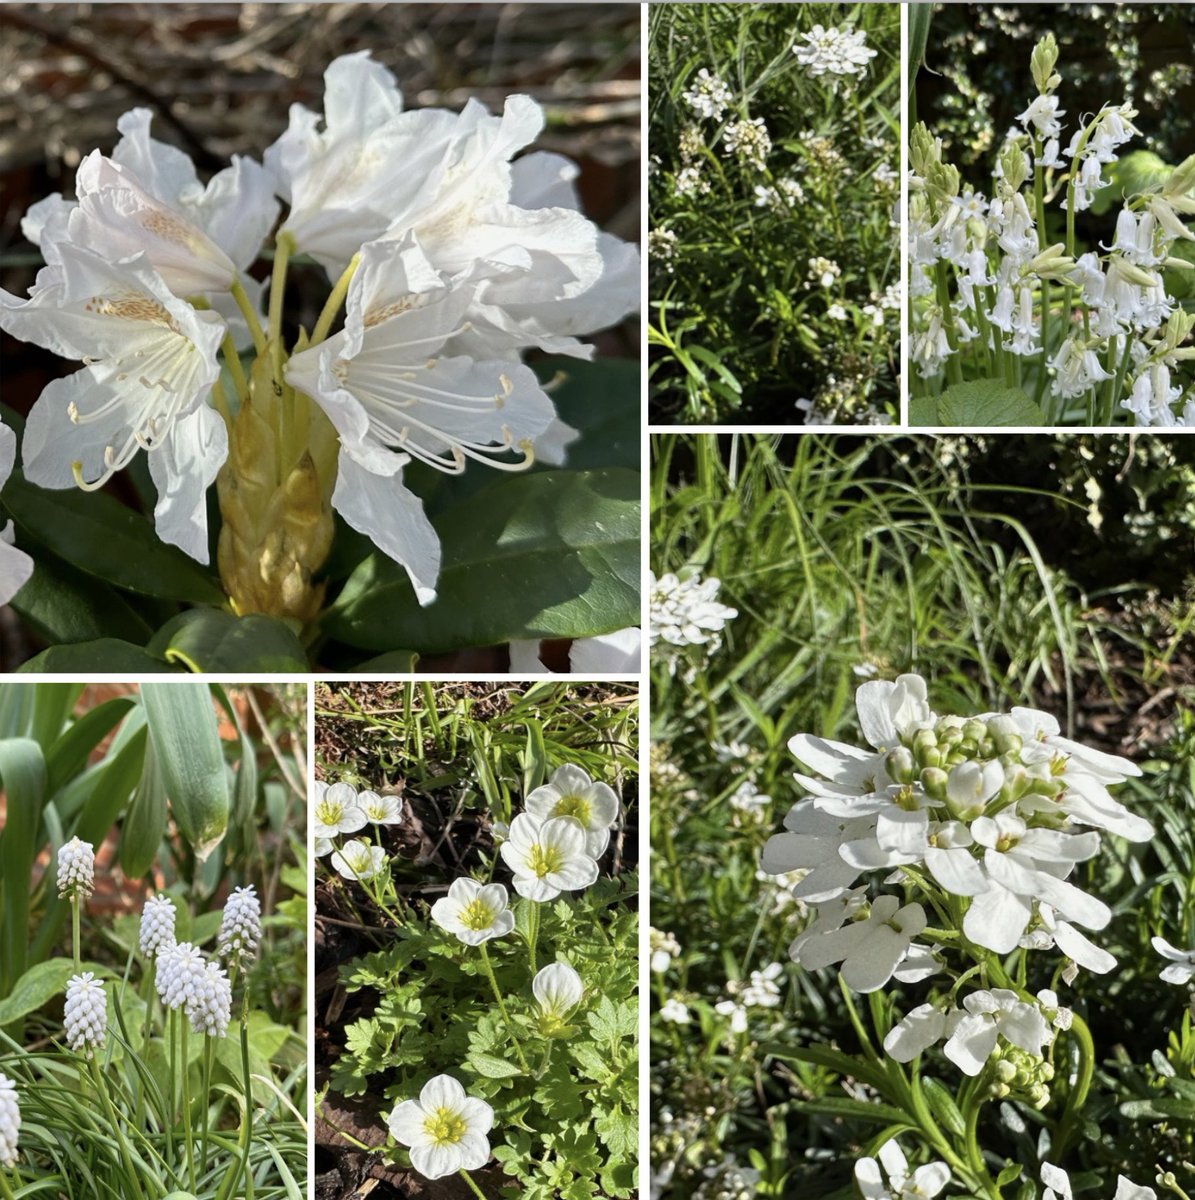 There might be colourful flowers coming into bloom around the garden, but the white garden is also coming into its own 
🌿🤍🌿🤍🌿🤍🌿🤍🌿🤍🌿🤍🌿#SixOnSaturday

Have a super Saturday 🙂

#whitegarden #whiteflowers #flowers